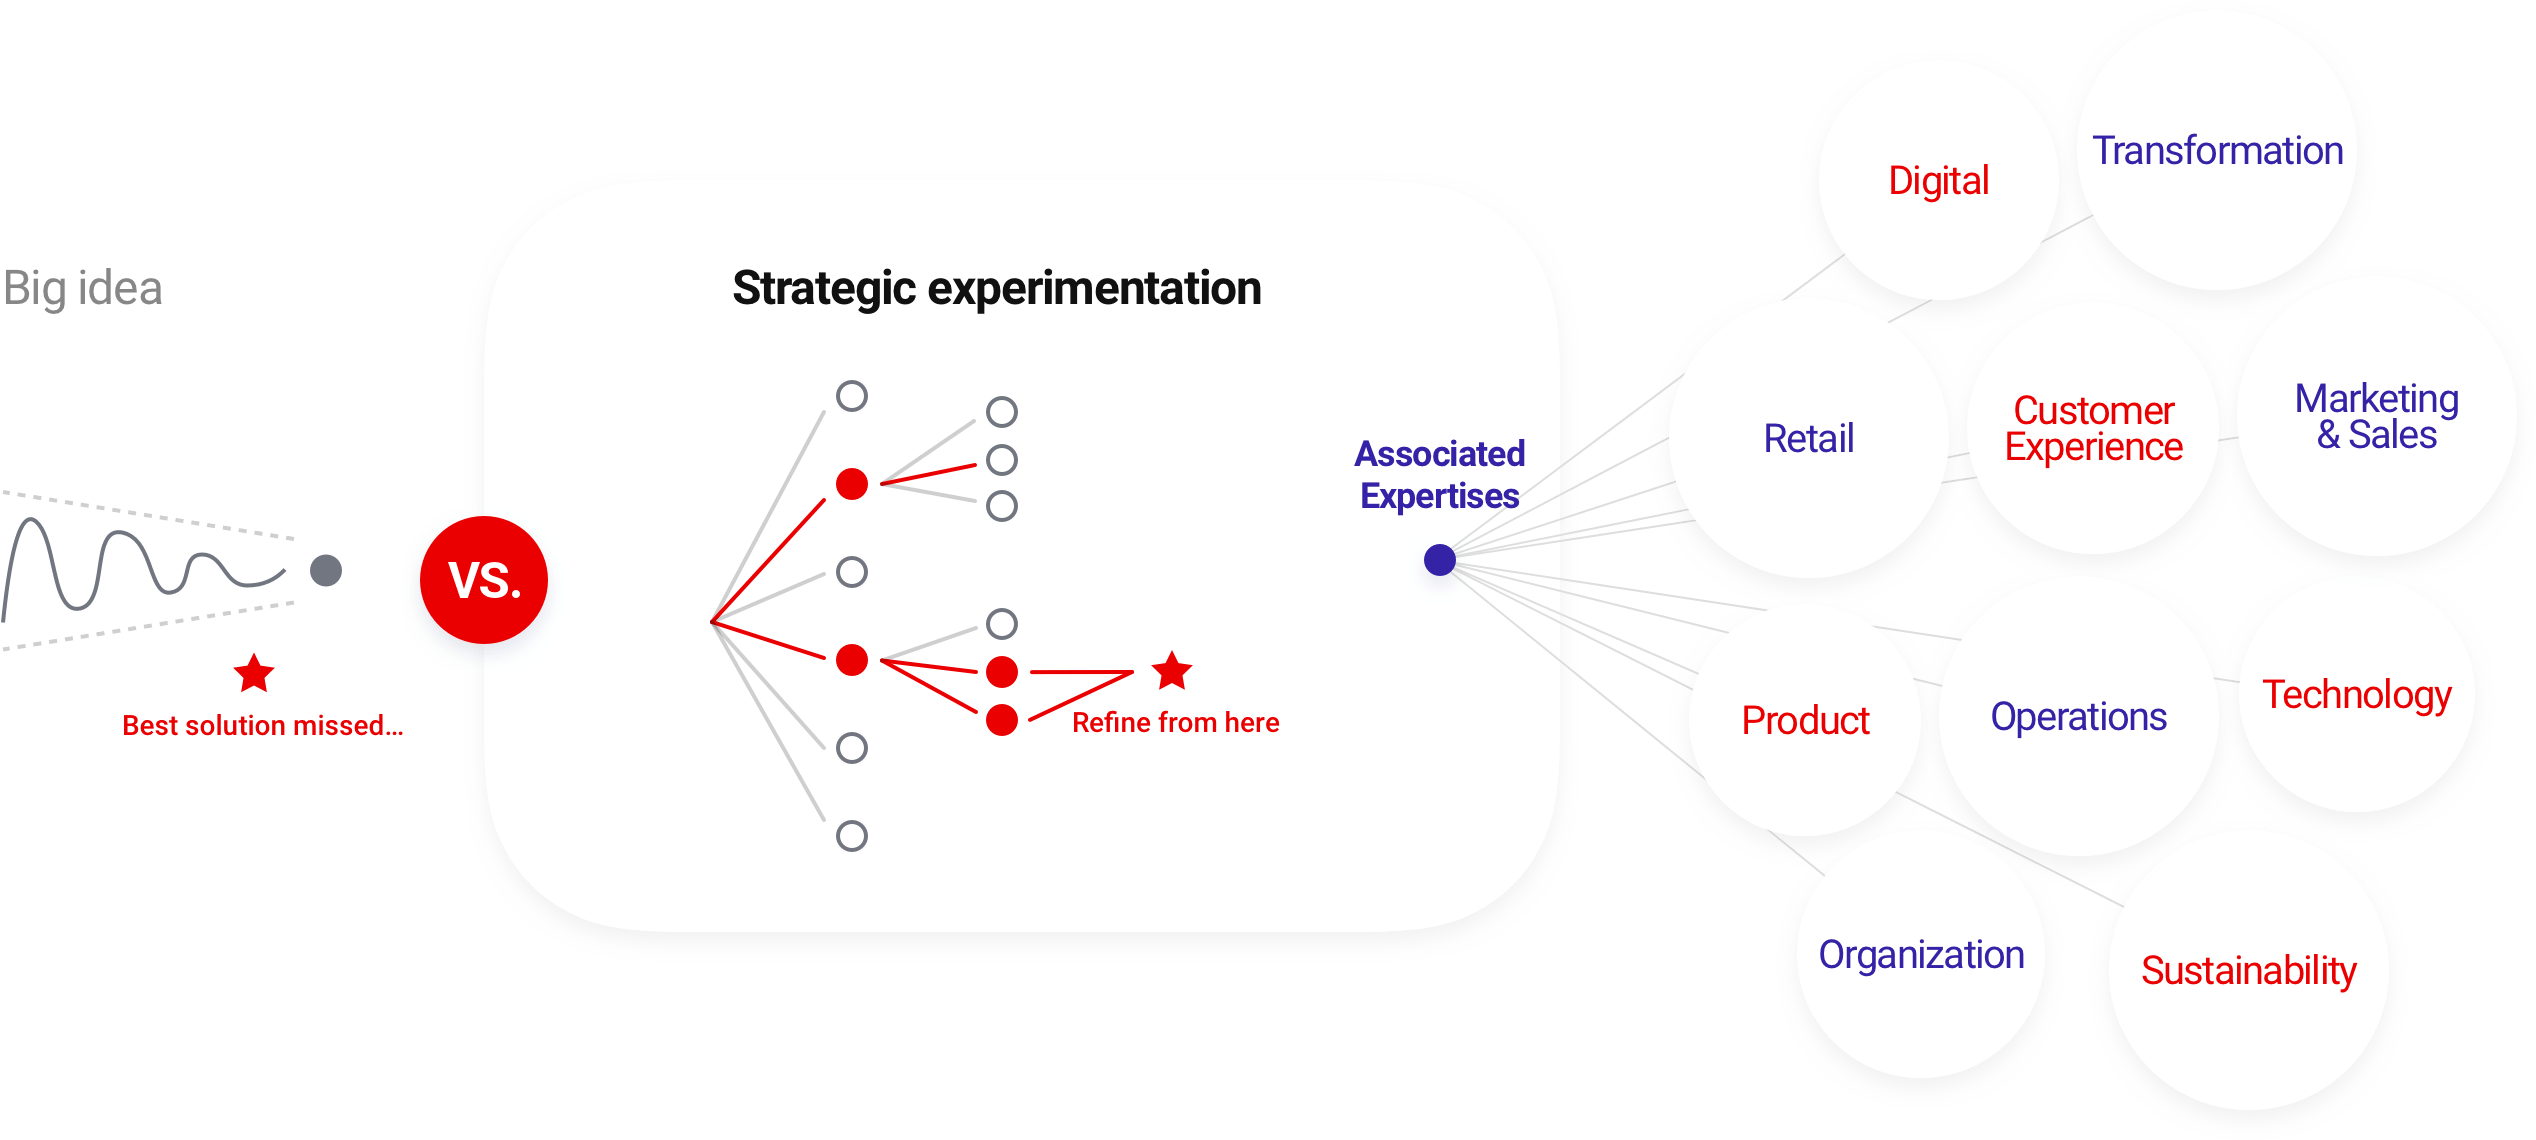 A new strategy approach, and associated expertises